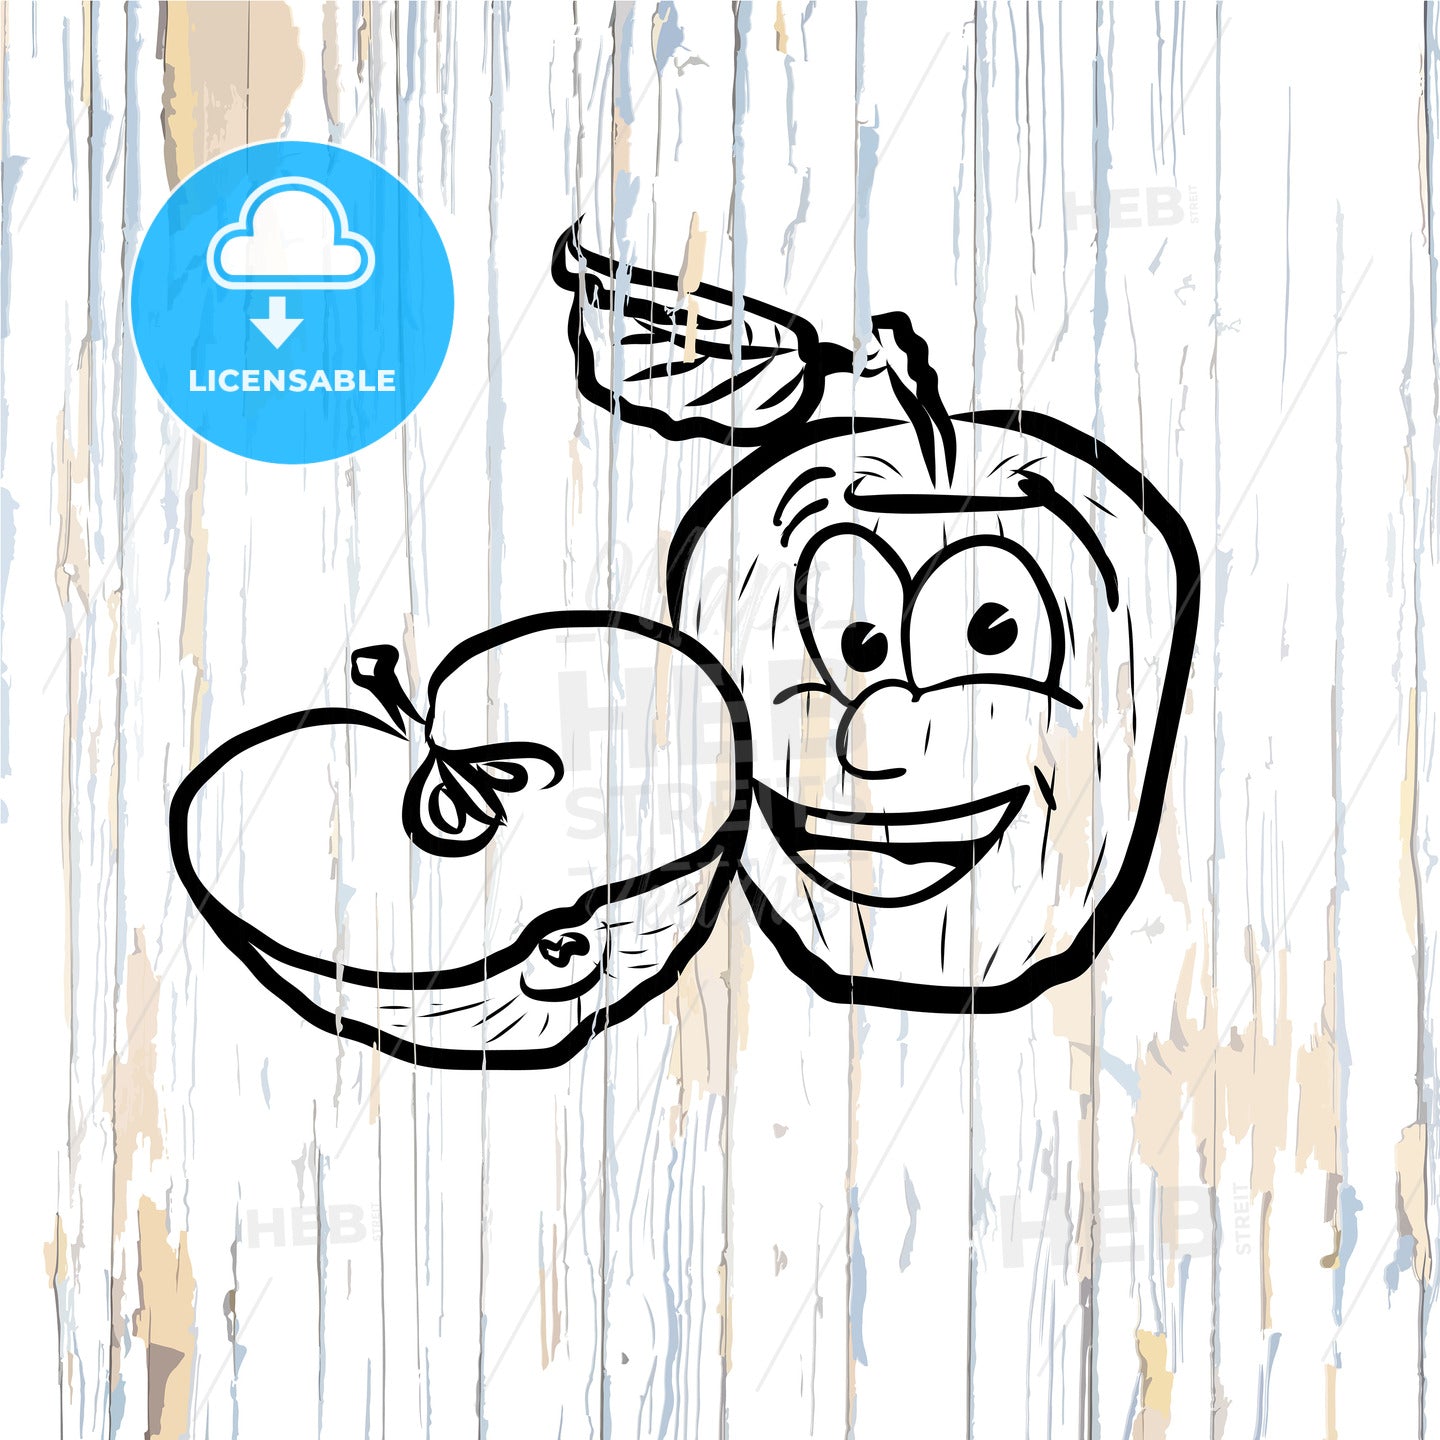 Apple icons sketches on wooden background – instant download